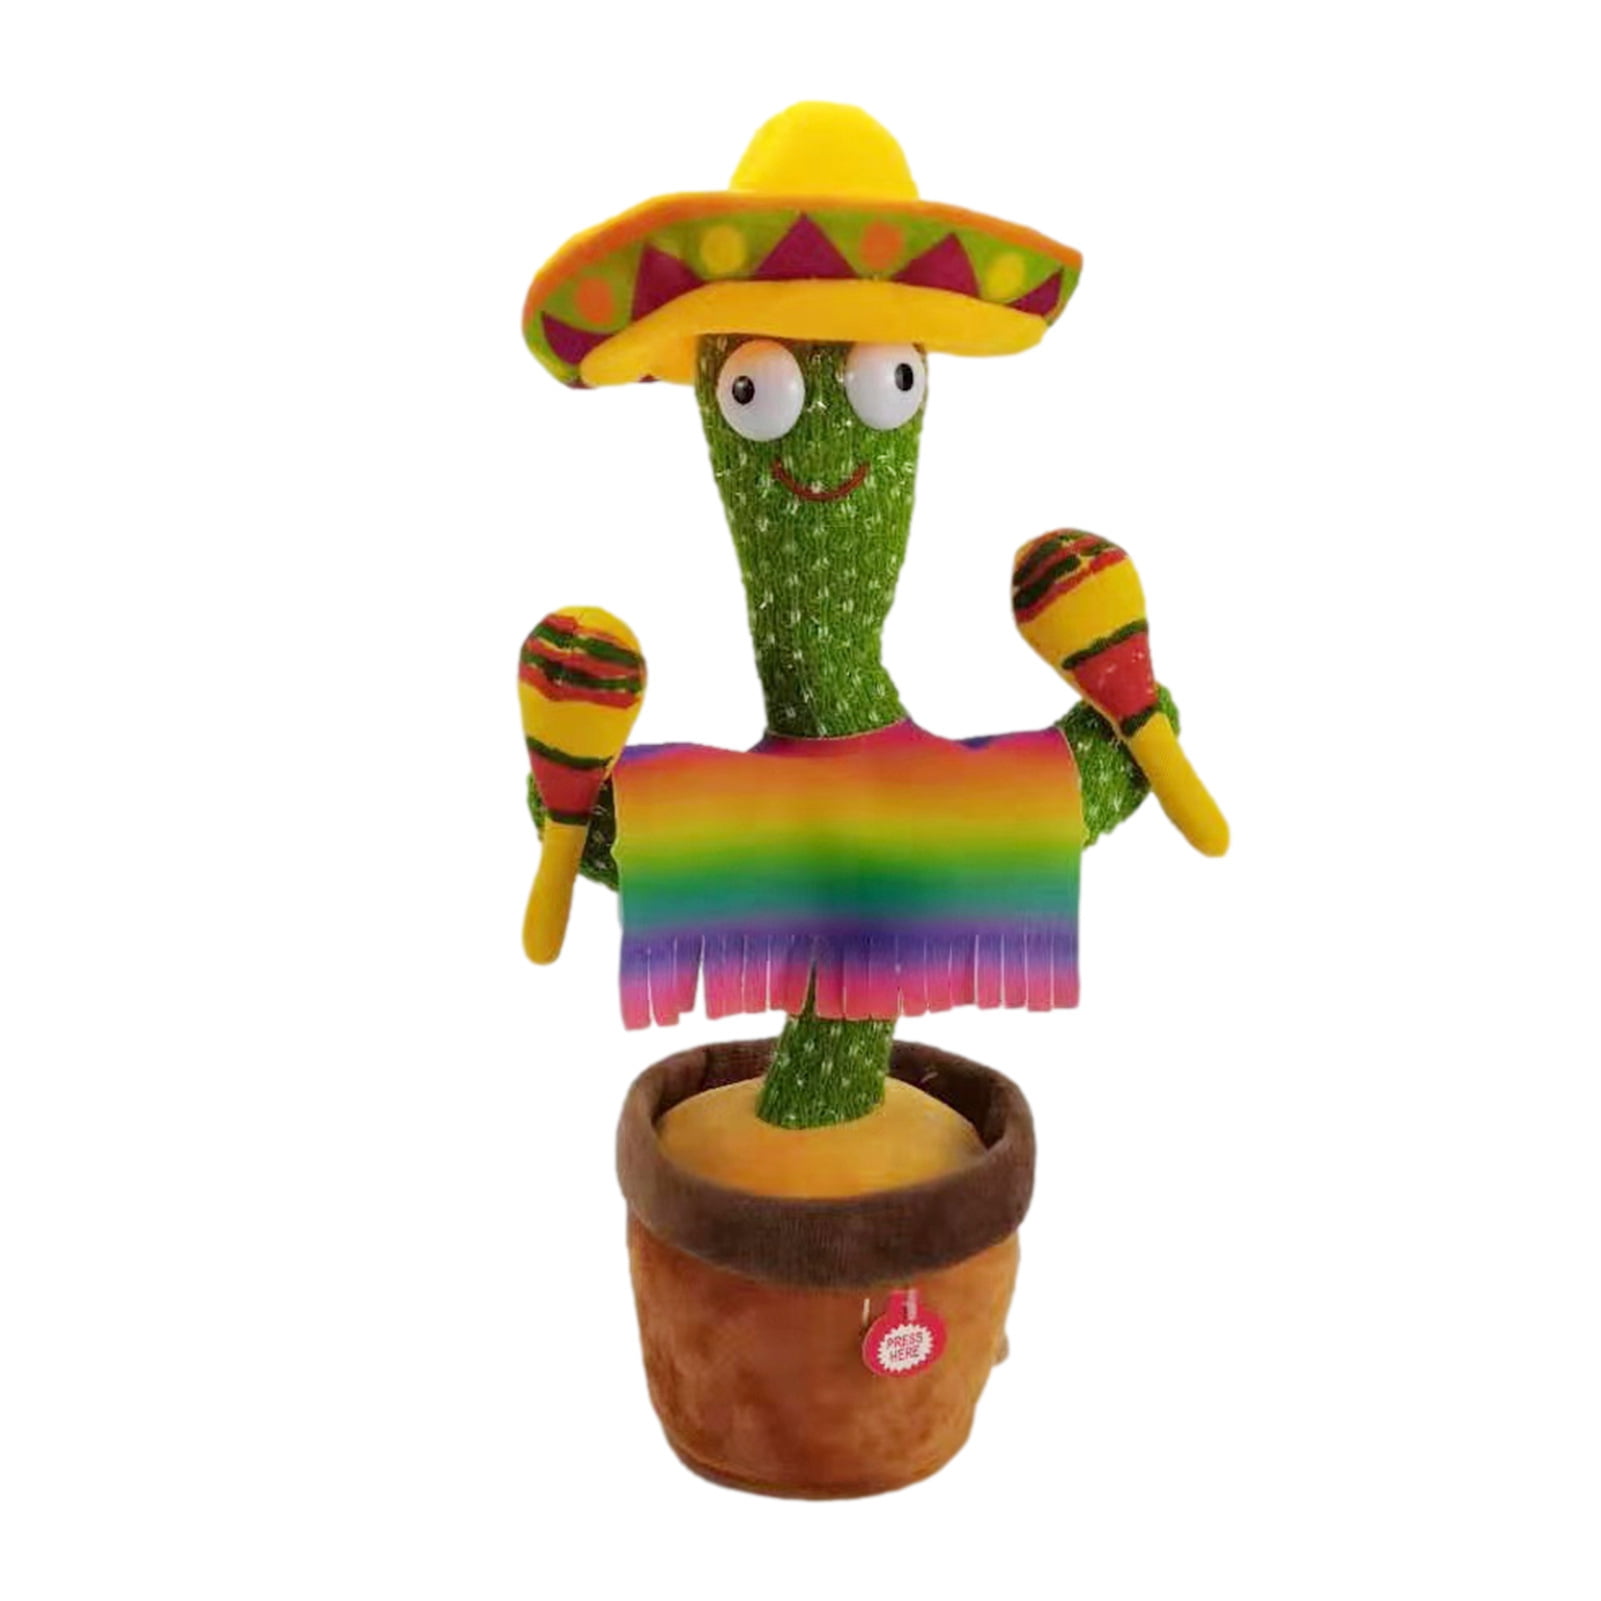 Cactus Ornaments Decoration Electronic Dancing Singing Cactus Toys Home Deco 